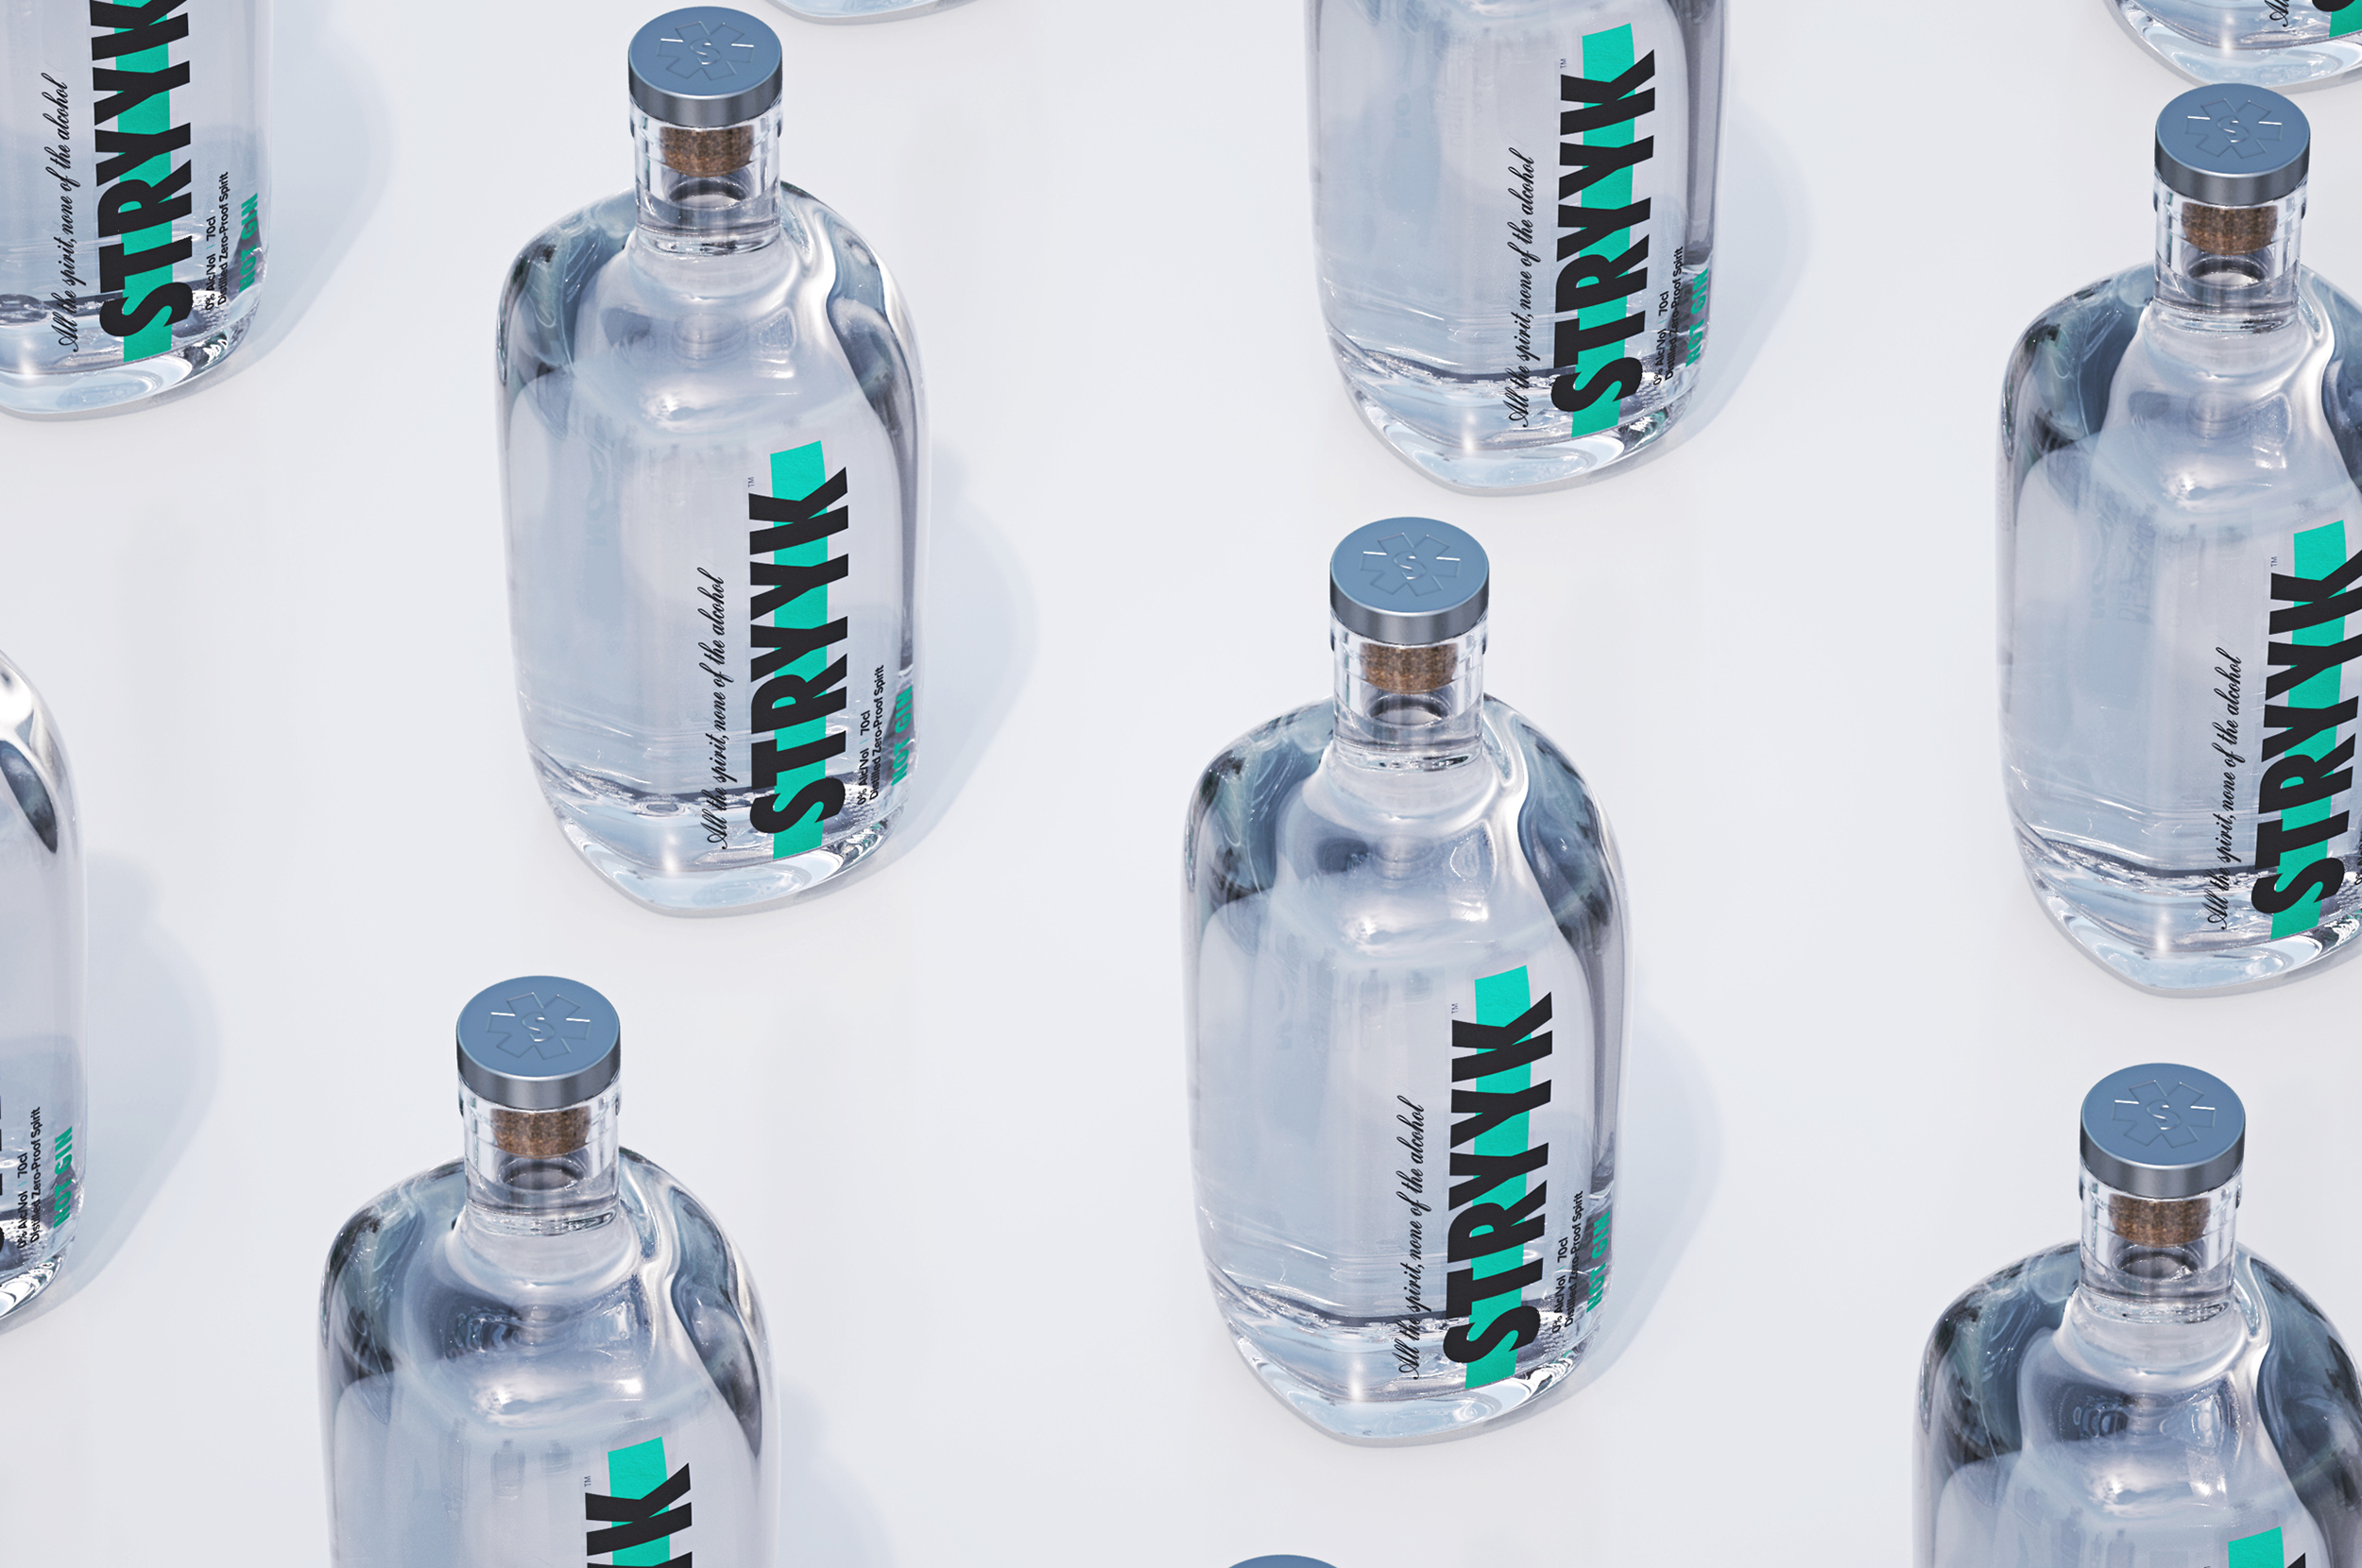 Positioning, Brand Identity and Packaging for this Zero-Proof Spirits